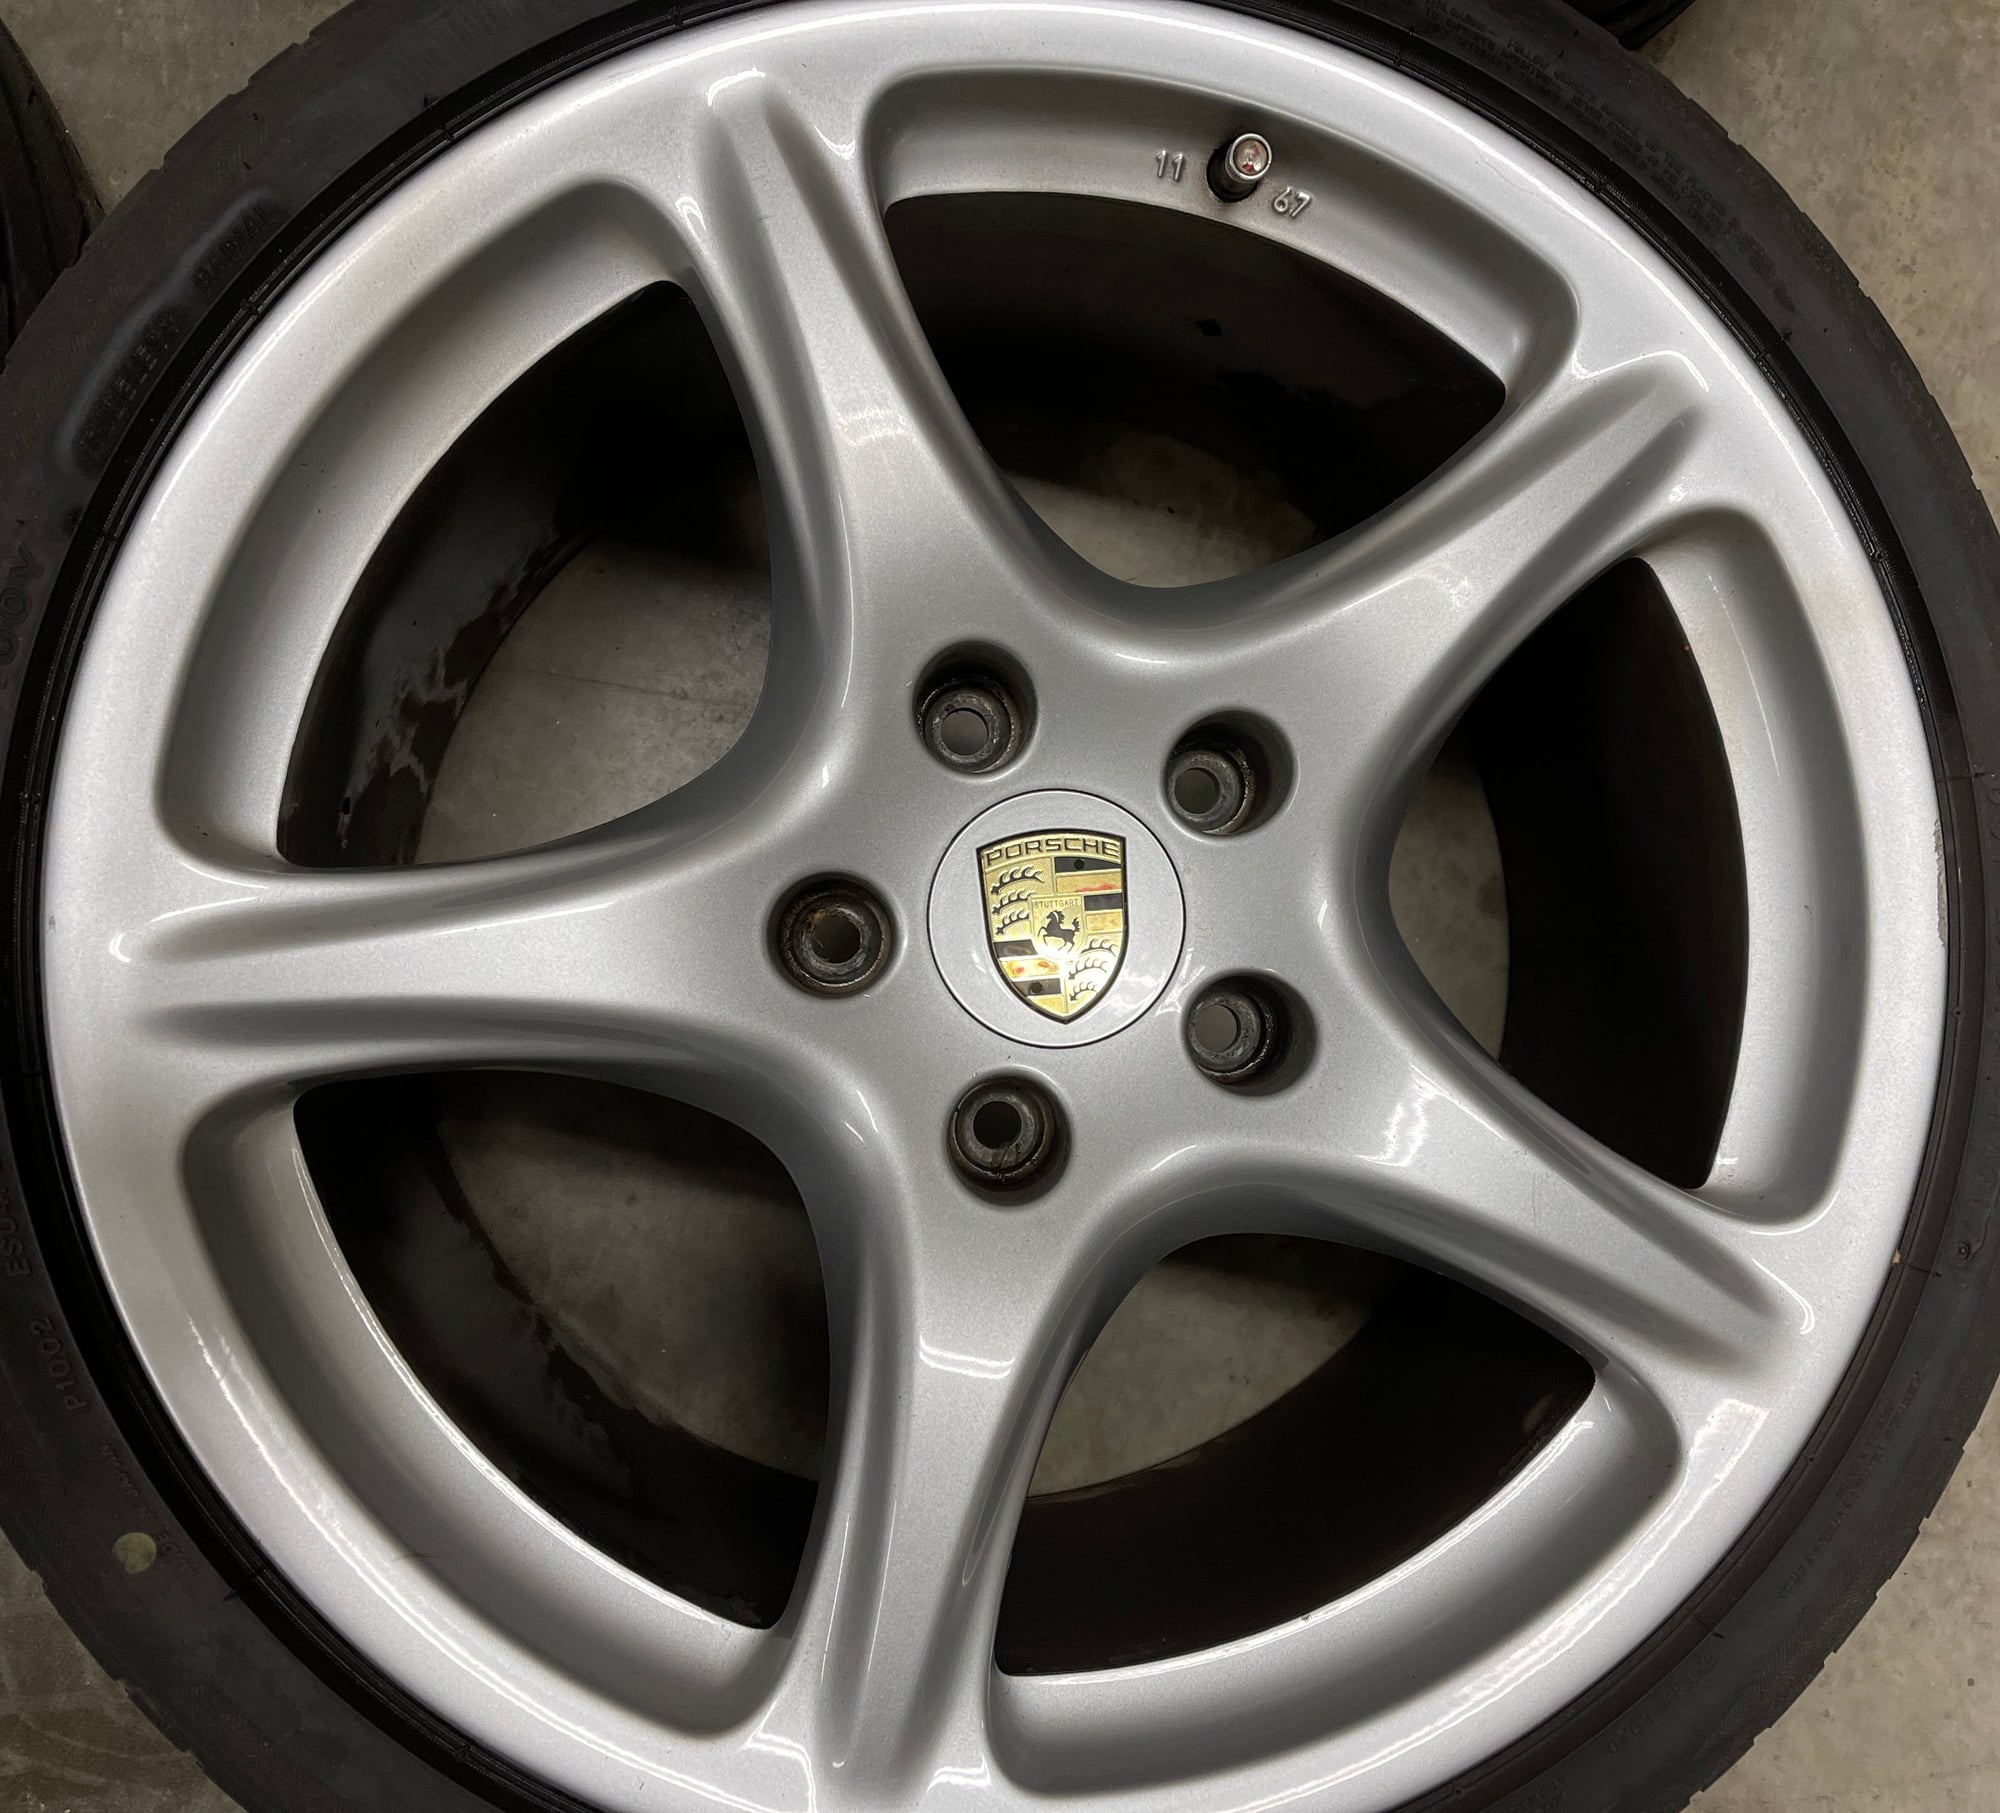 Wheels and Tires/Axles - Porsche 997 Carrera II 19 Inch Wheels - Used - 2005 to 2012 Porsche 911 - Charlotte, NC 28270, United States